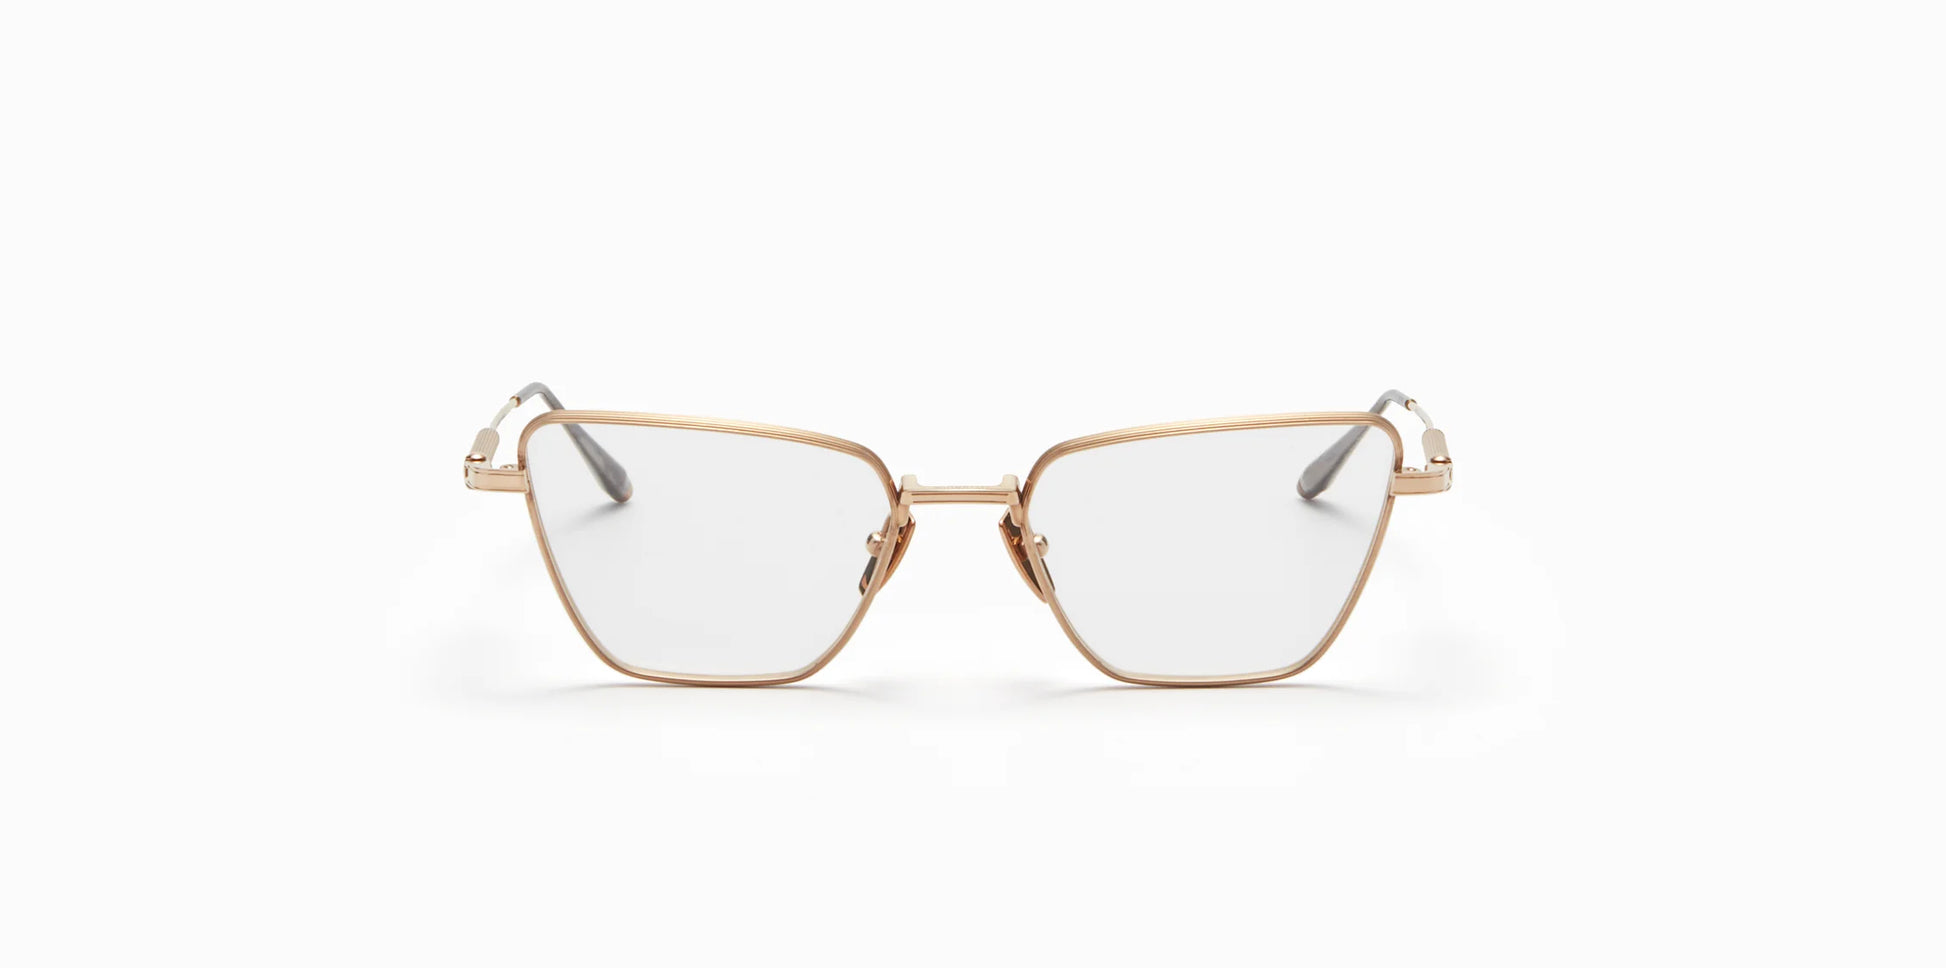 Front view of Akoni's new "Vega" frame in the brushed white gold colorway.